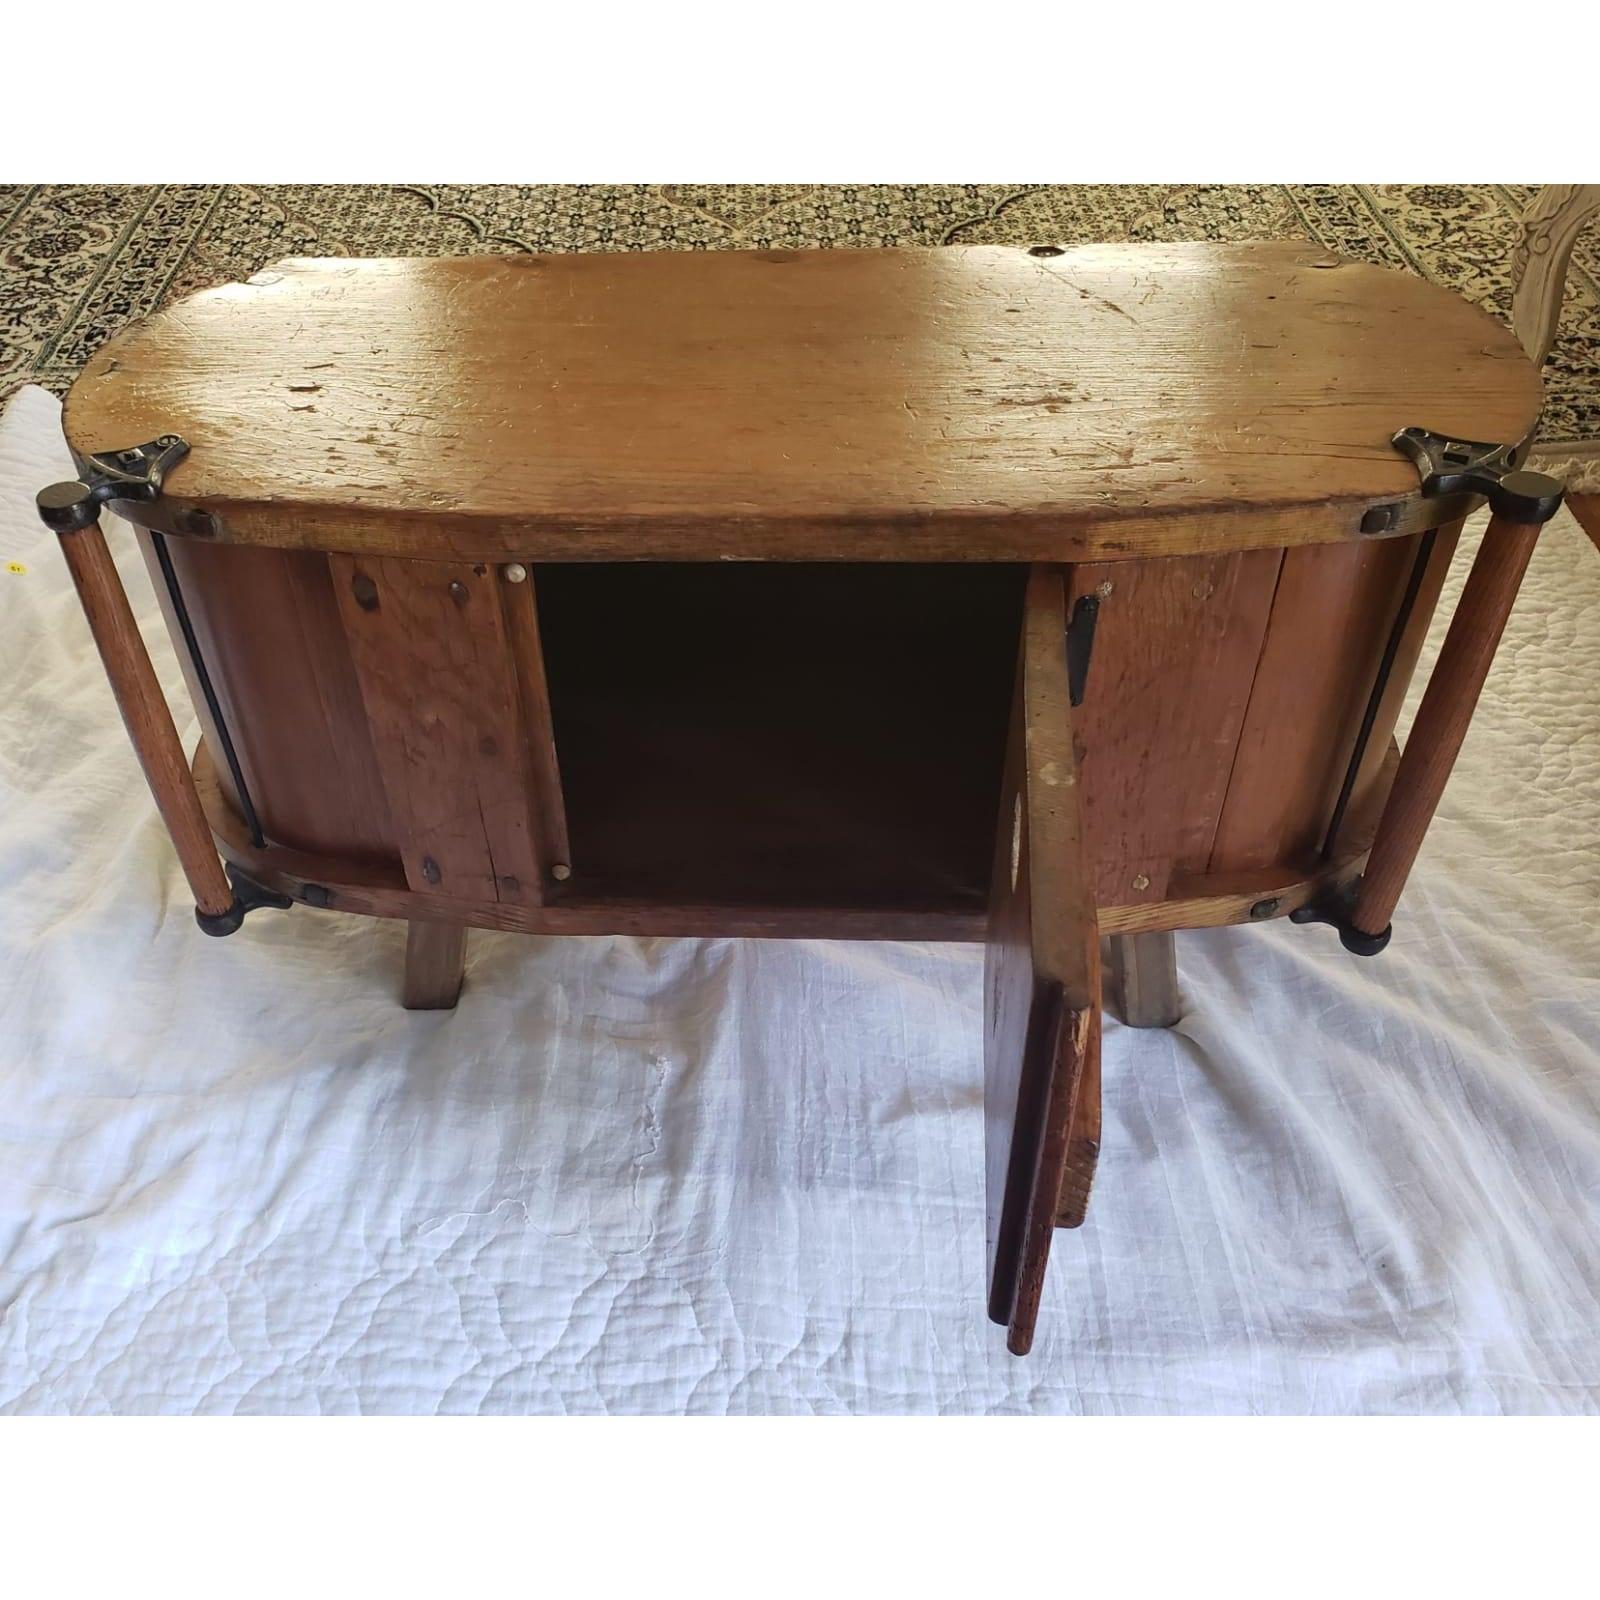 Antique butter churn table cabinet with center door that opens for storage.
One door in front. Handle on each side of front. Some scratches and age seams.
Measures 36